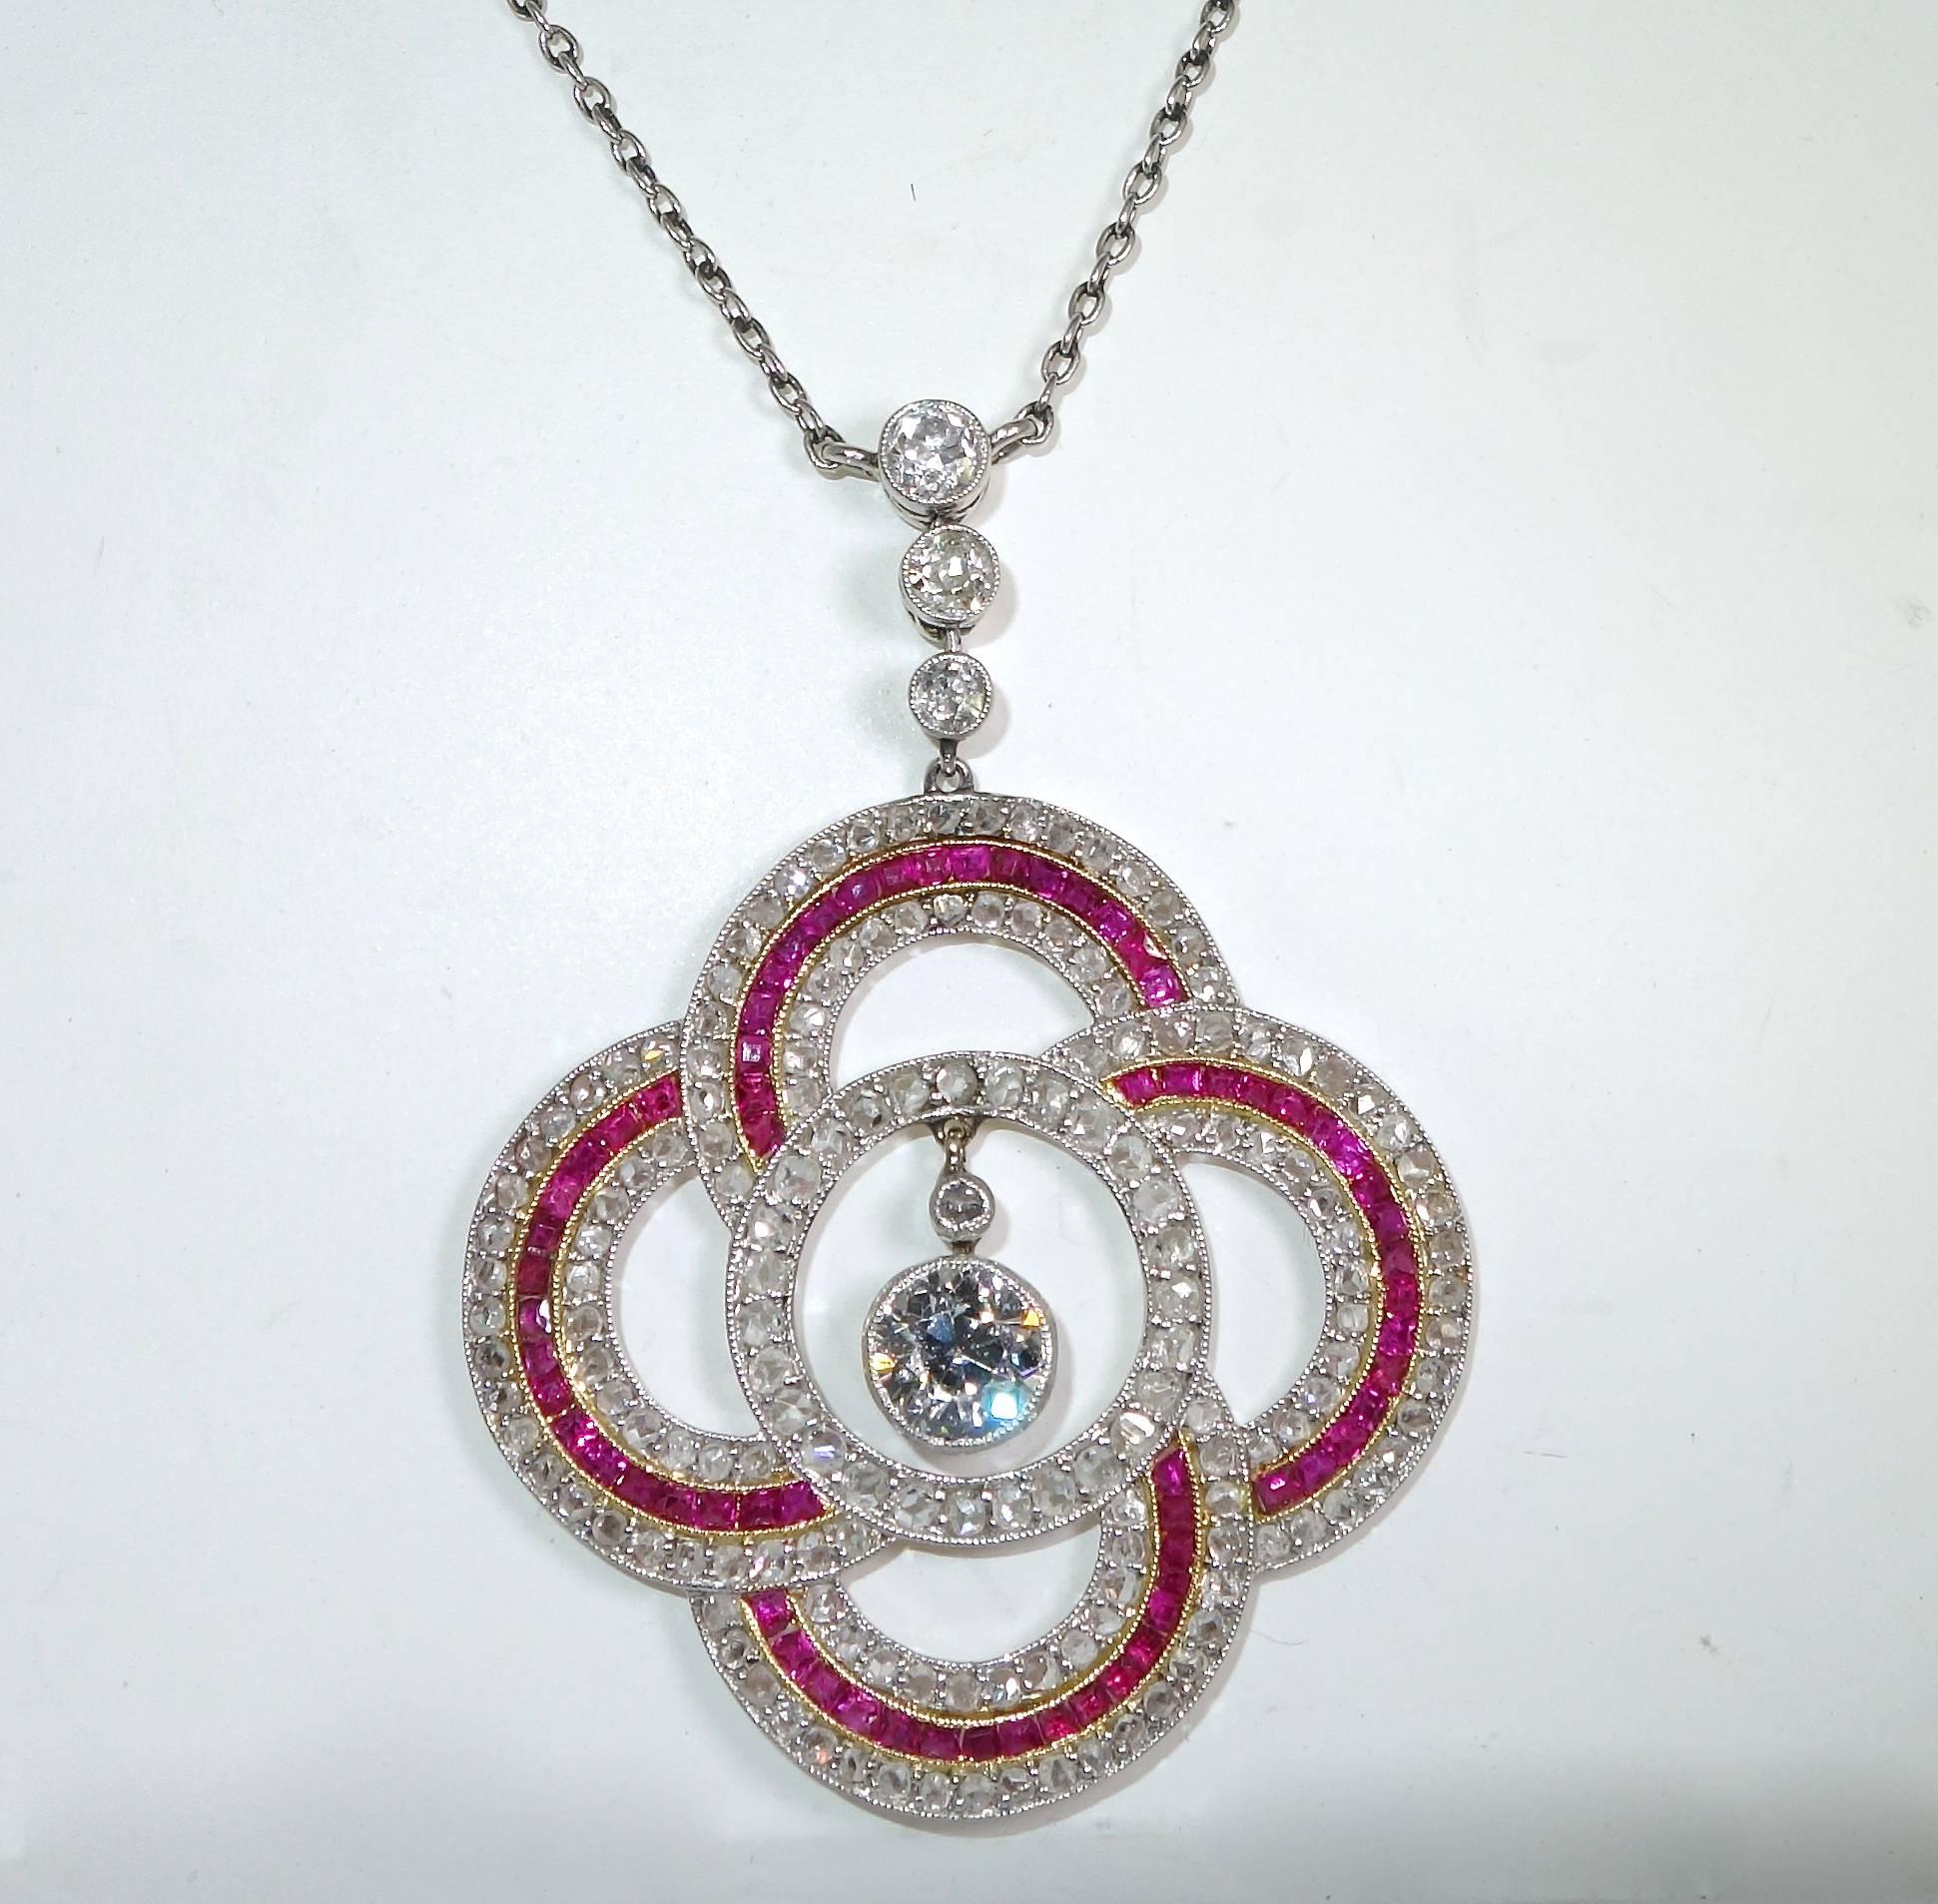 Calibre cut natural fine rubies and rose and European cut diamonds set in a quatrefoil design with a hanging European cut diamond in the center.  This pendant is finely made and is suspended from a 16 inch platinum chain.  There are over 150